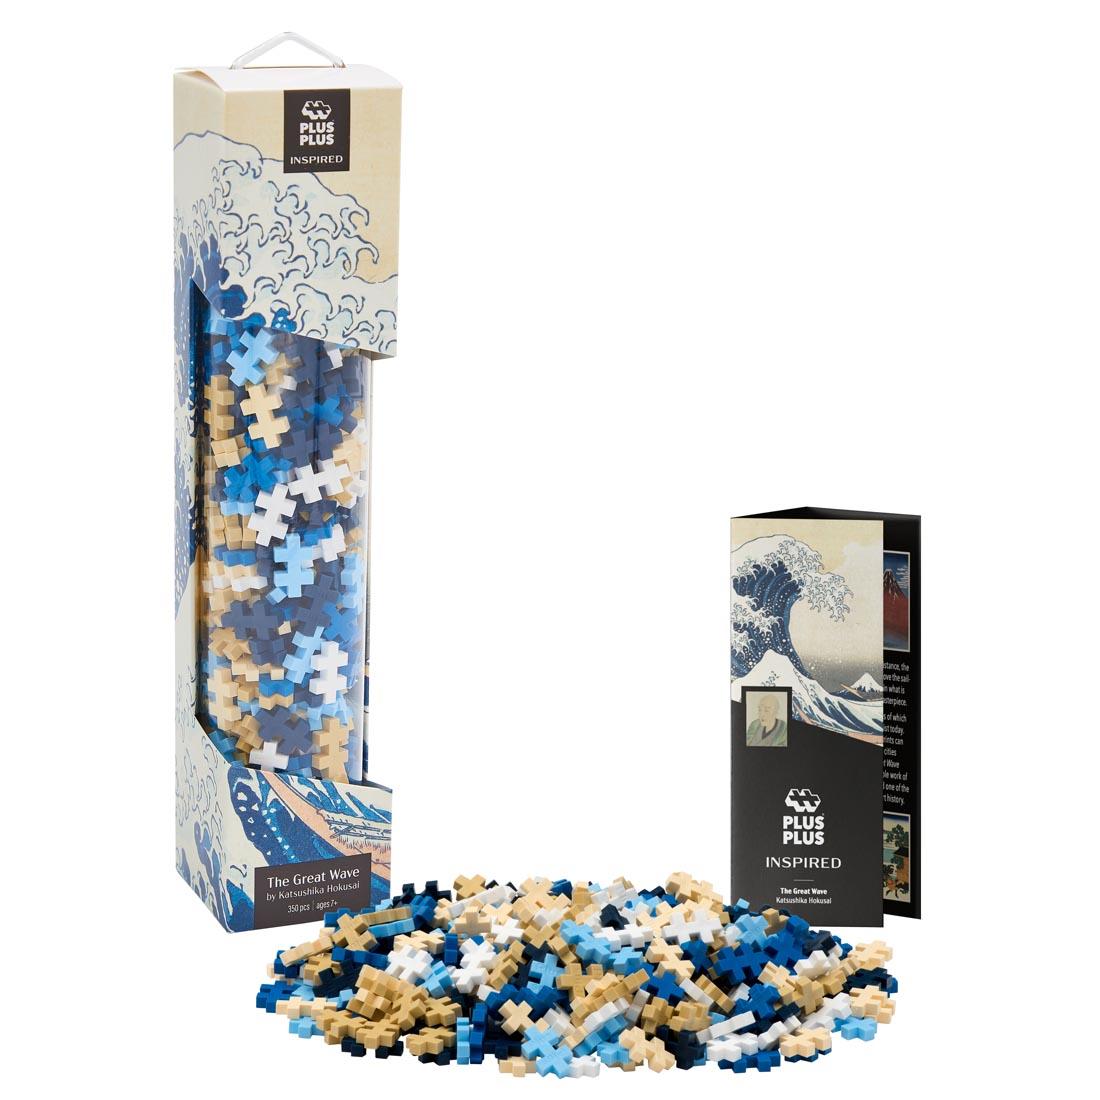 Plus-Plus 350-Piece Hokusai Inspired Set in package beside a pile of plus-plus pieces and the educational flyer